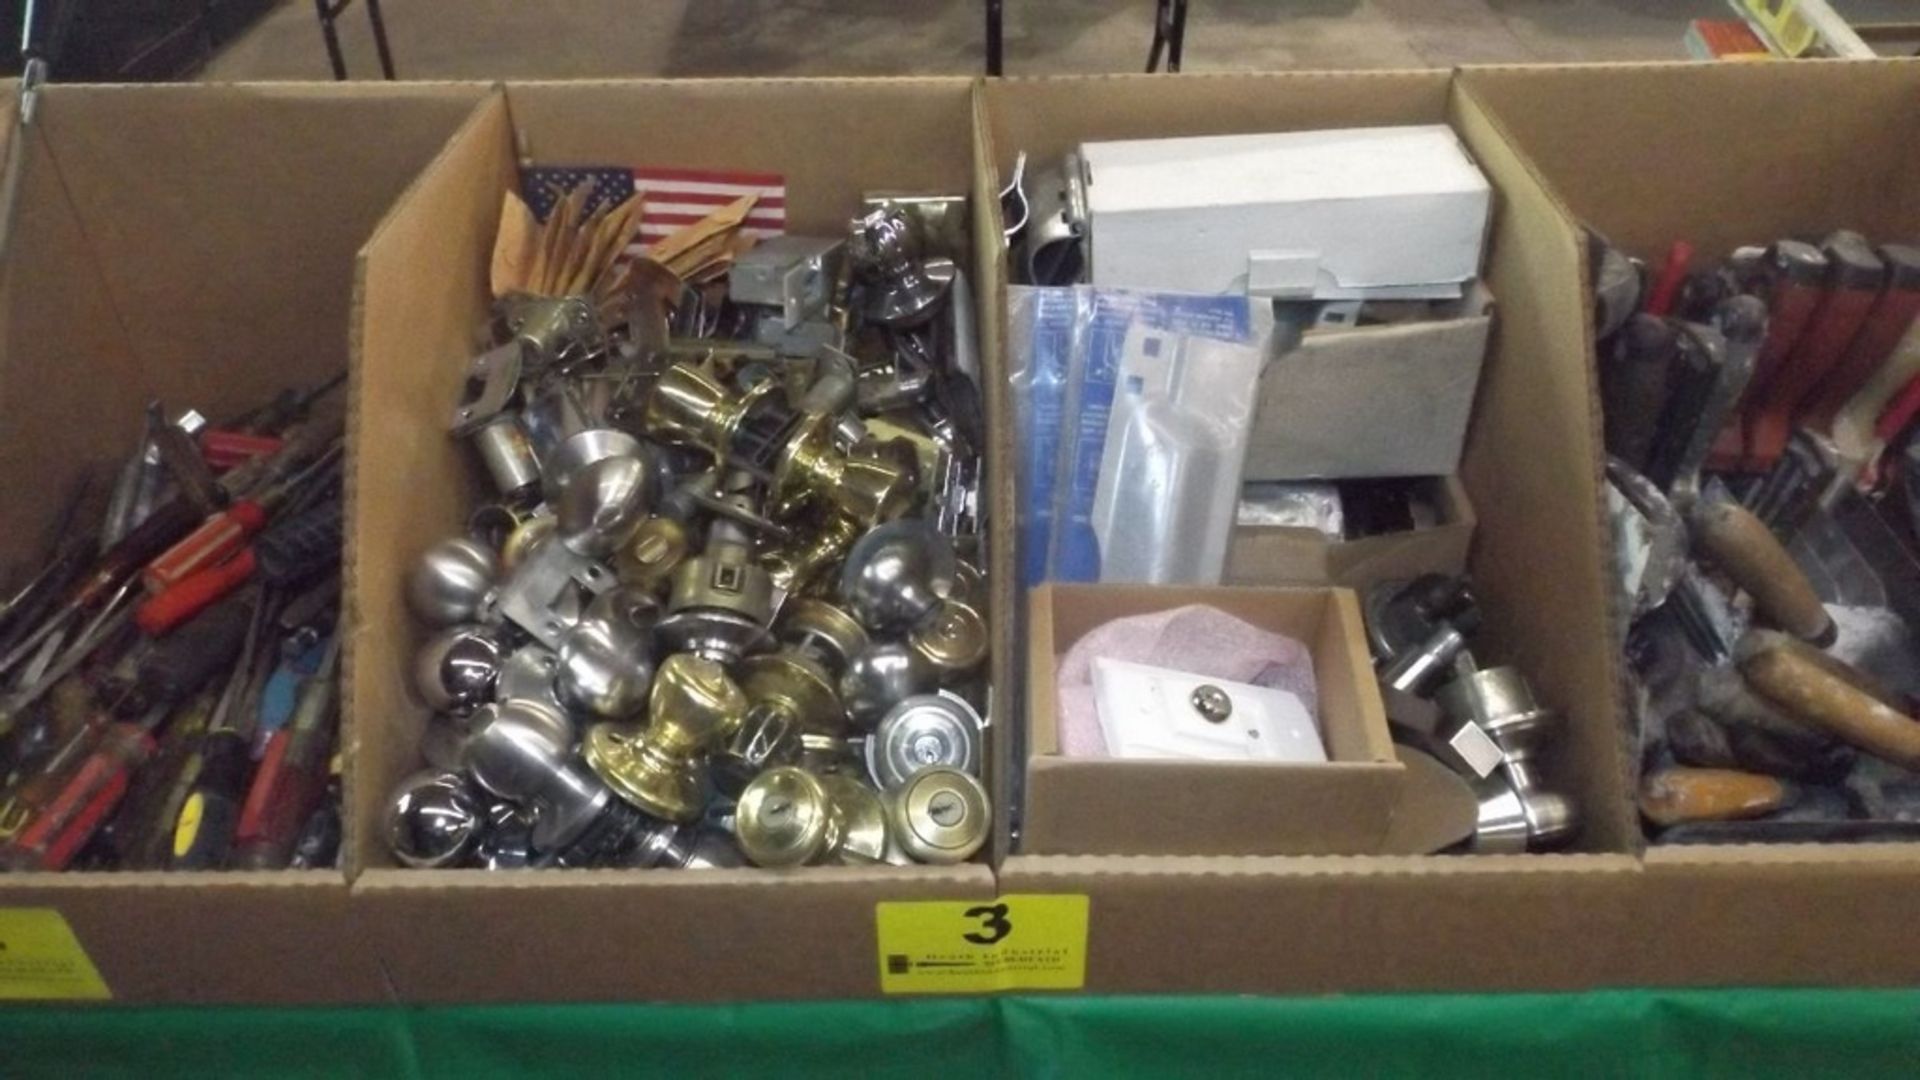 BOXES OF DOOR KNOBS AND ENTRY WAY HARDWARE